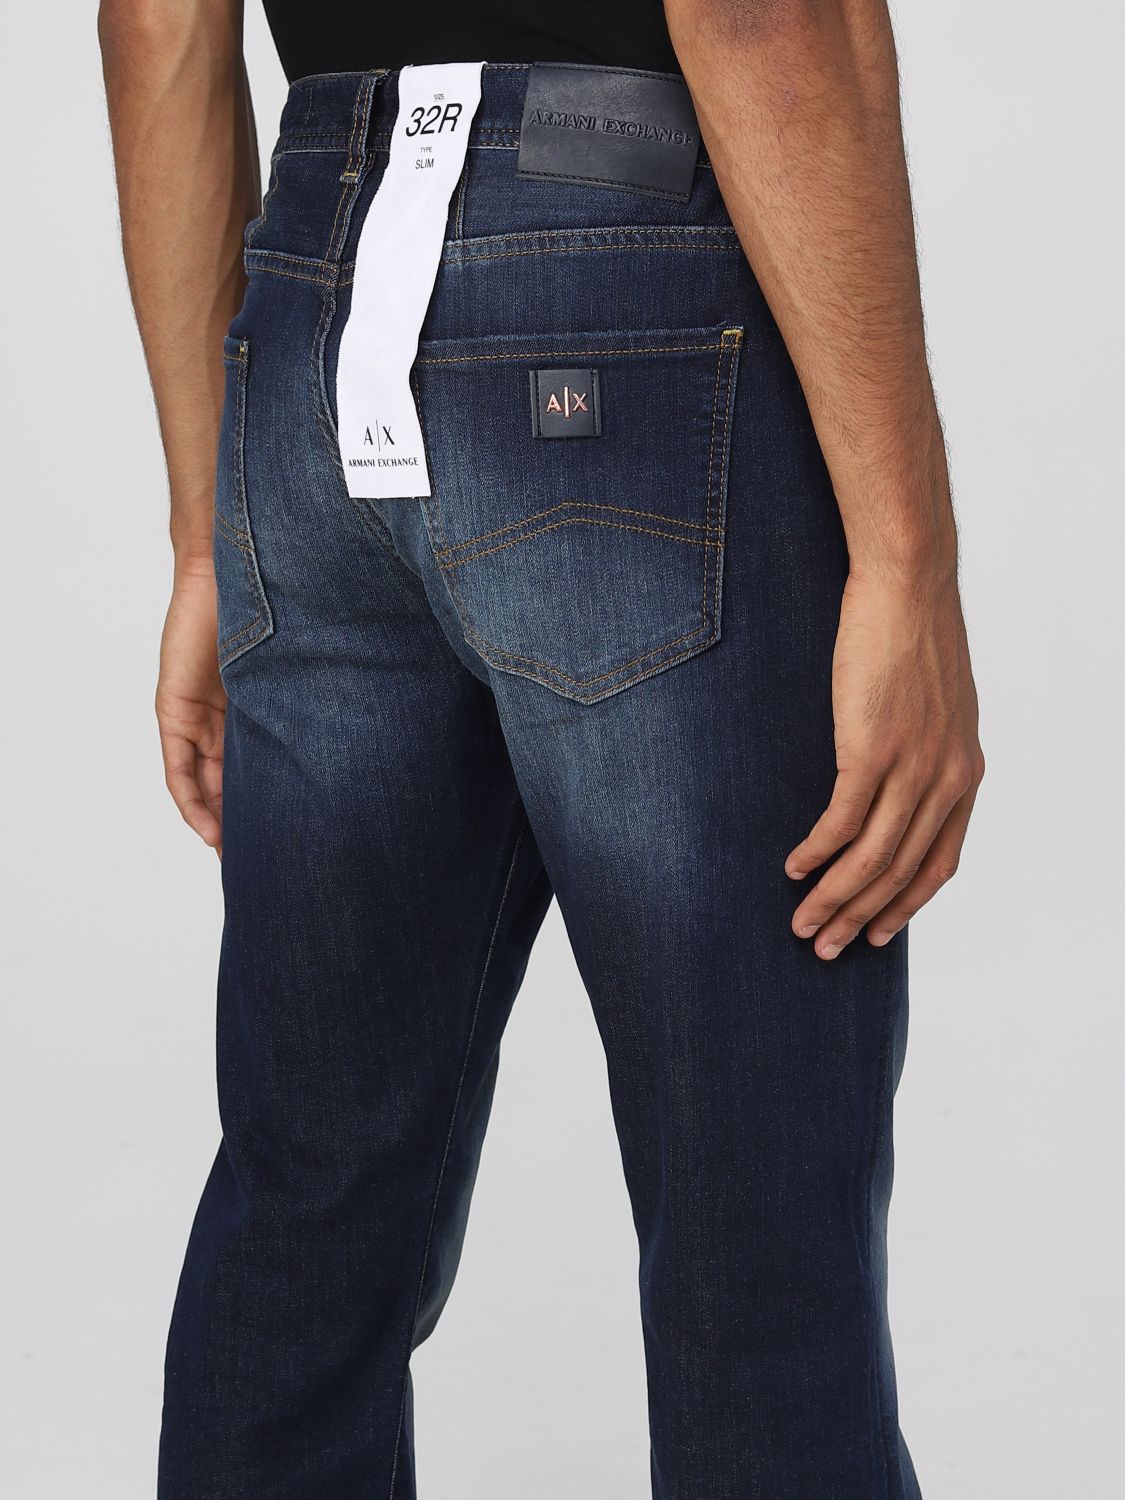 ARMANI EXCHANGE: jeans for Denim | Armani Exchange jeans online on GIGLIO.COM